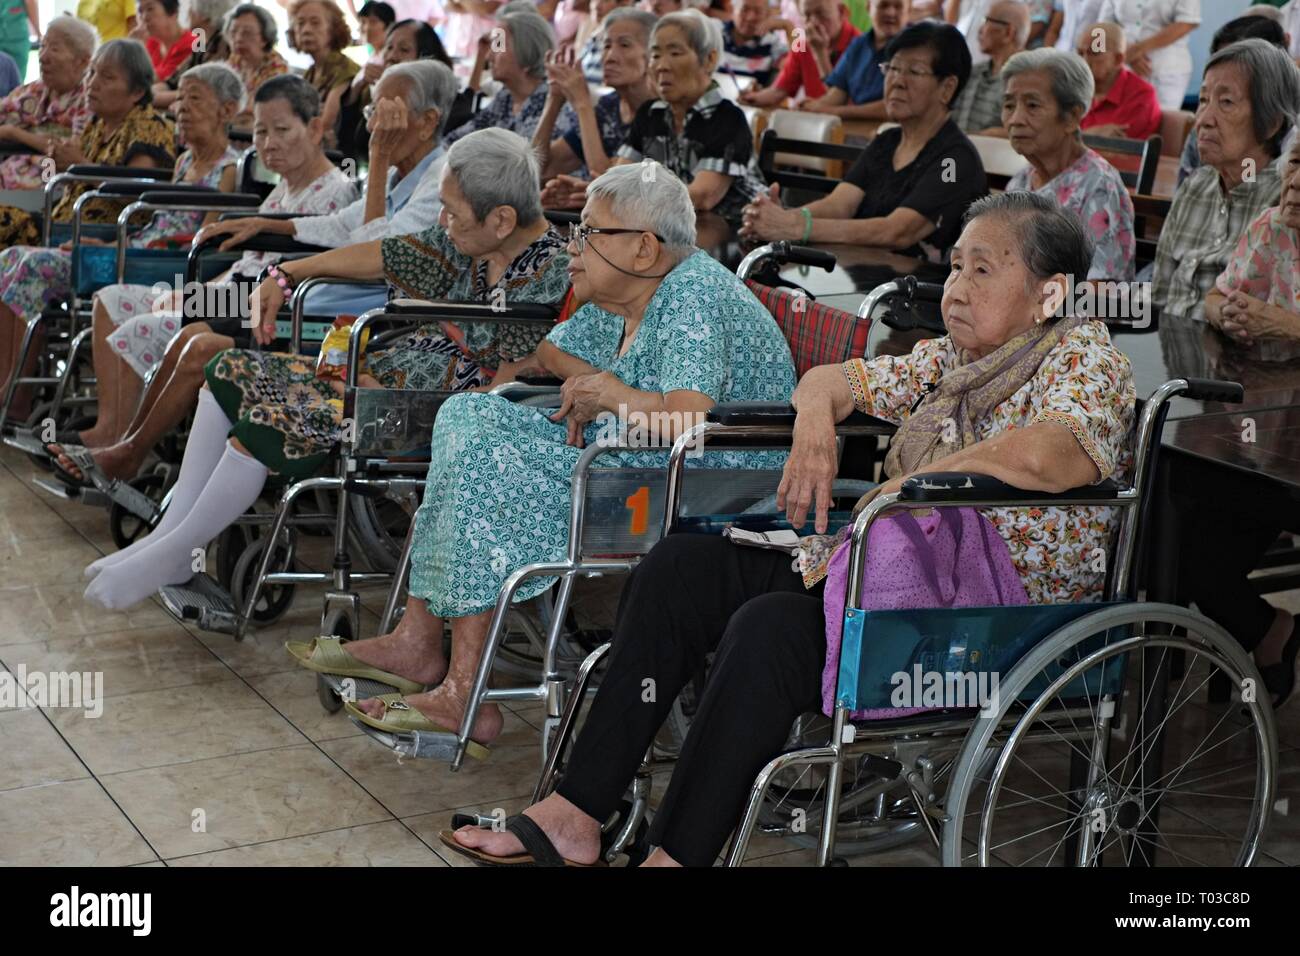 BOGOR, WEST JAVA, INDONESIA - FEBRUARY 2019 : A group of elderly people gather together in an elderly nursing home. Stock Photo